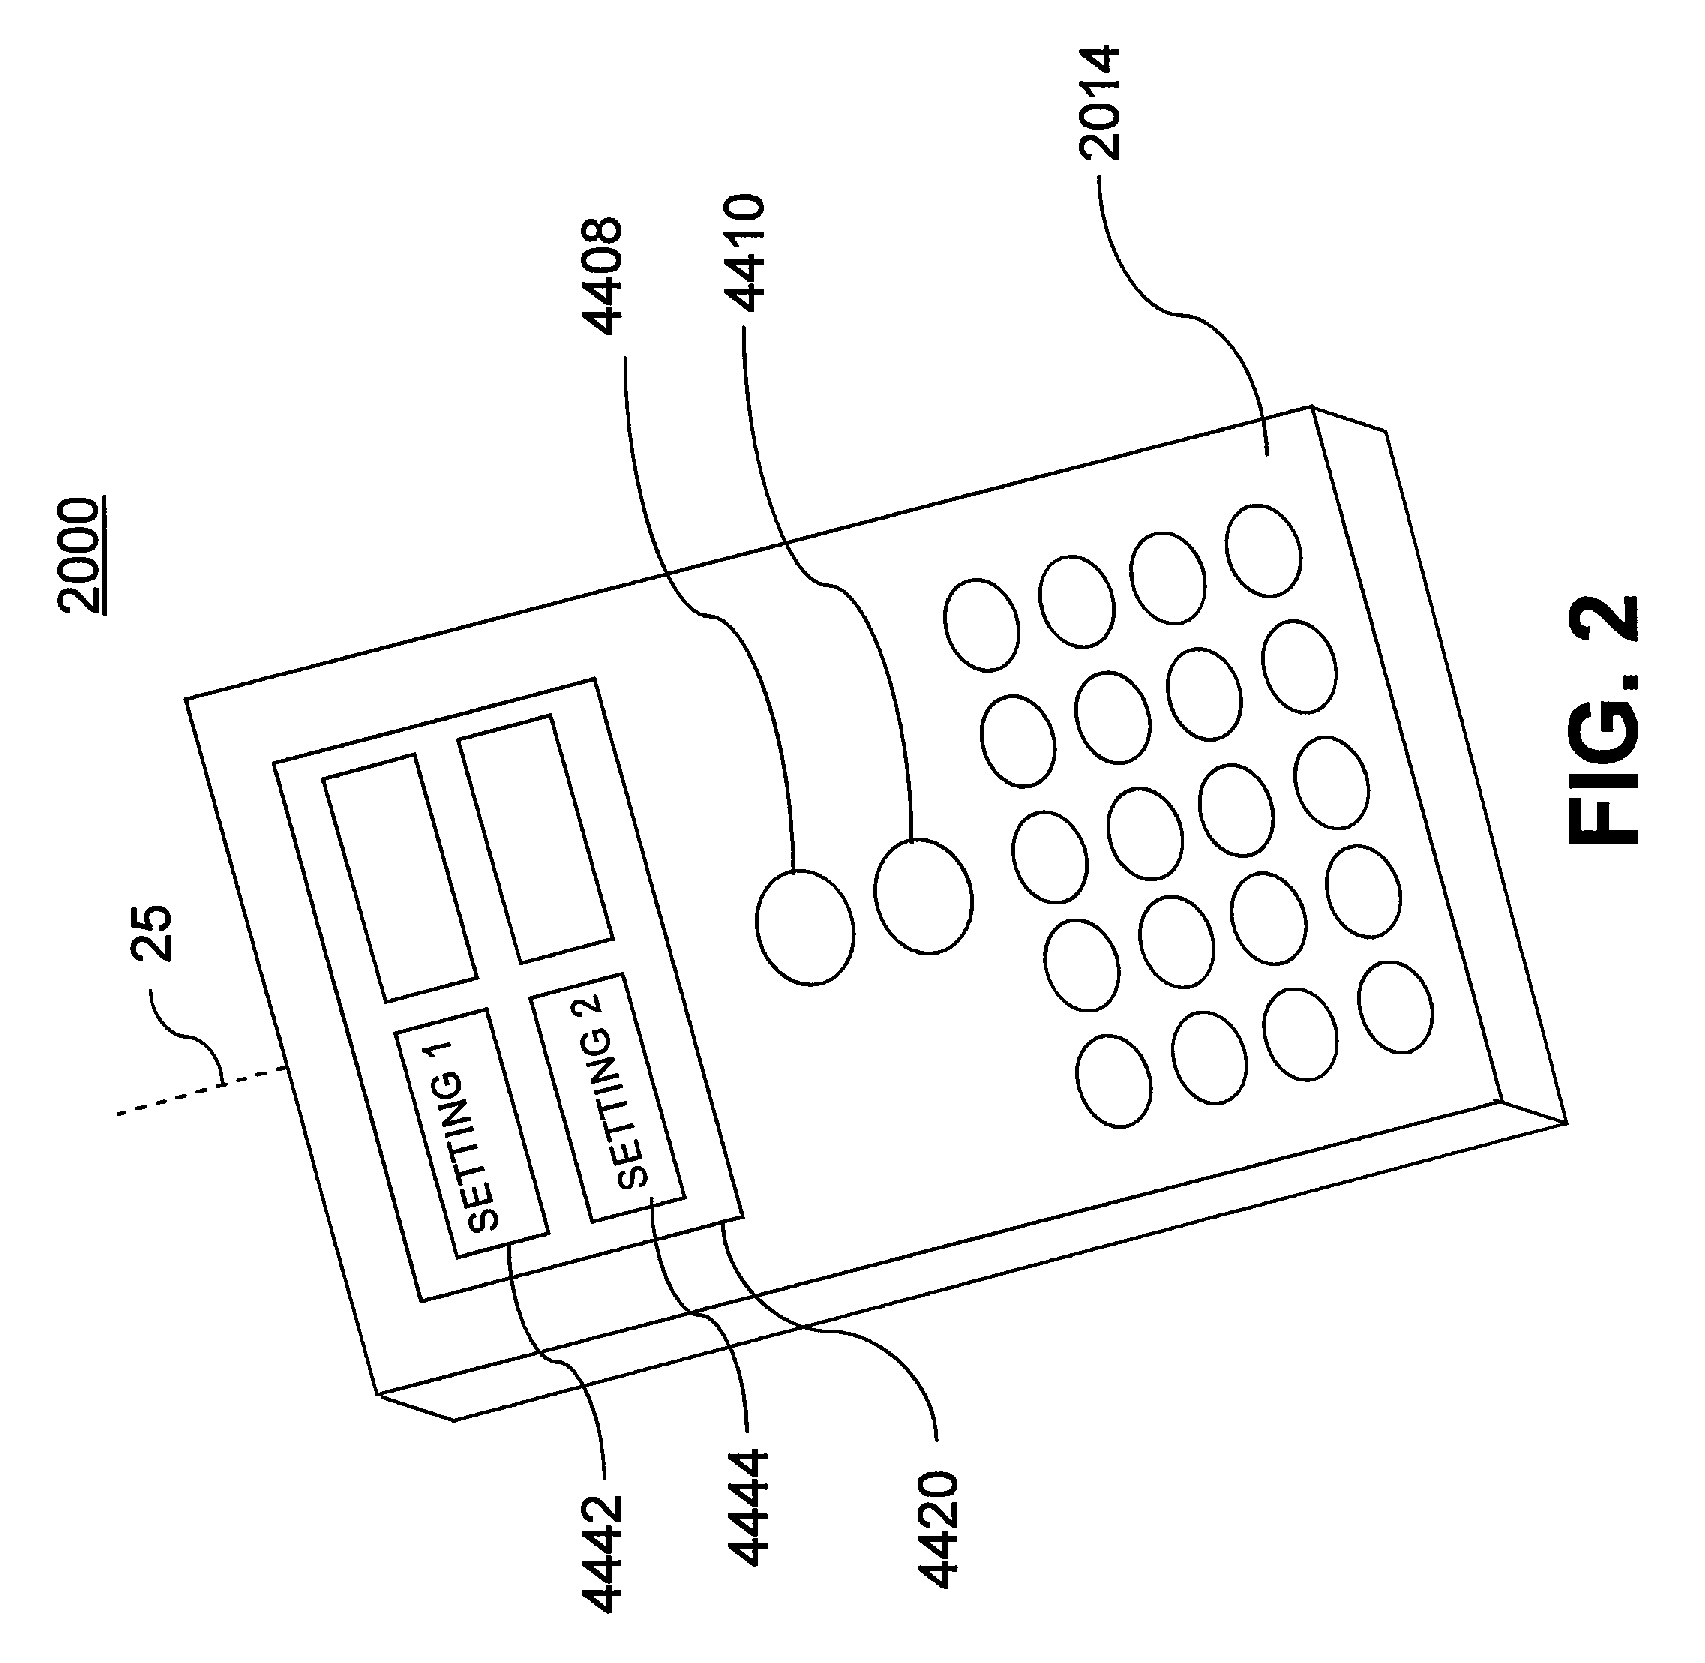 Bar code reader terminal and methods for operating the same having misread detection apparatus